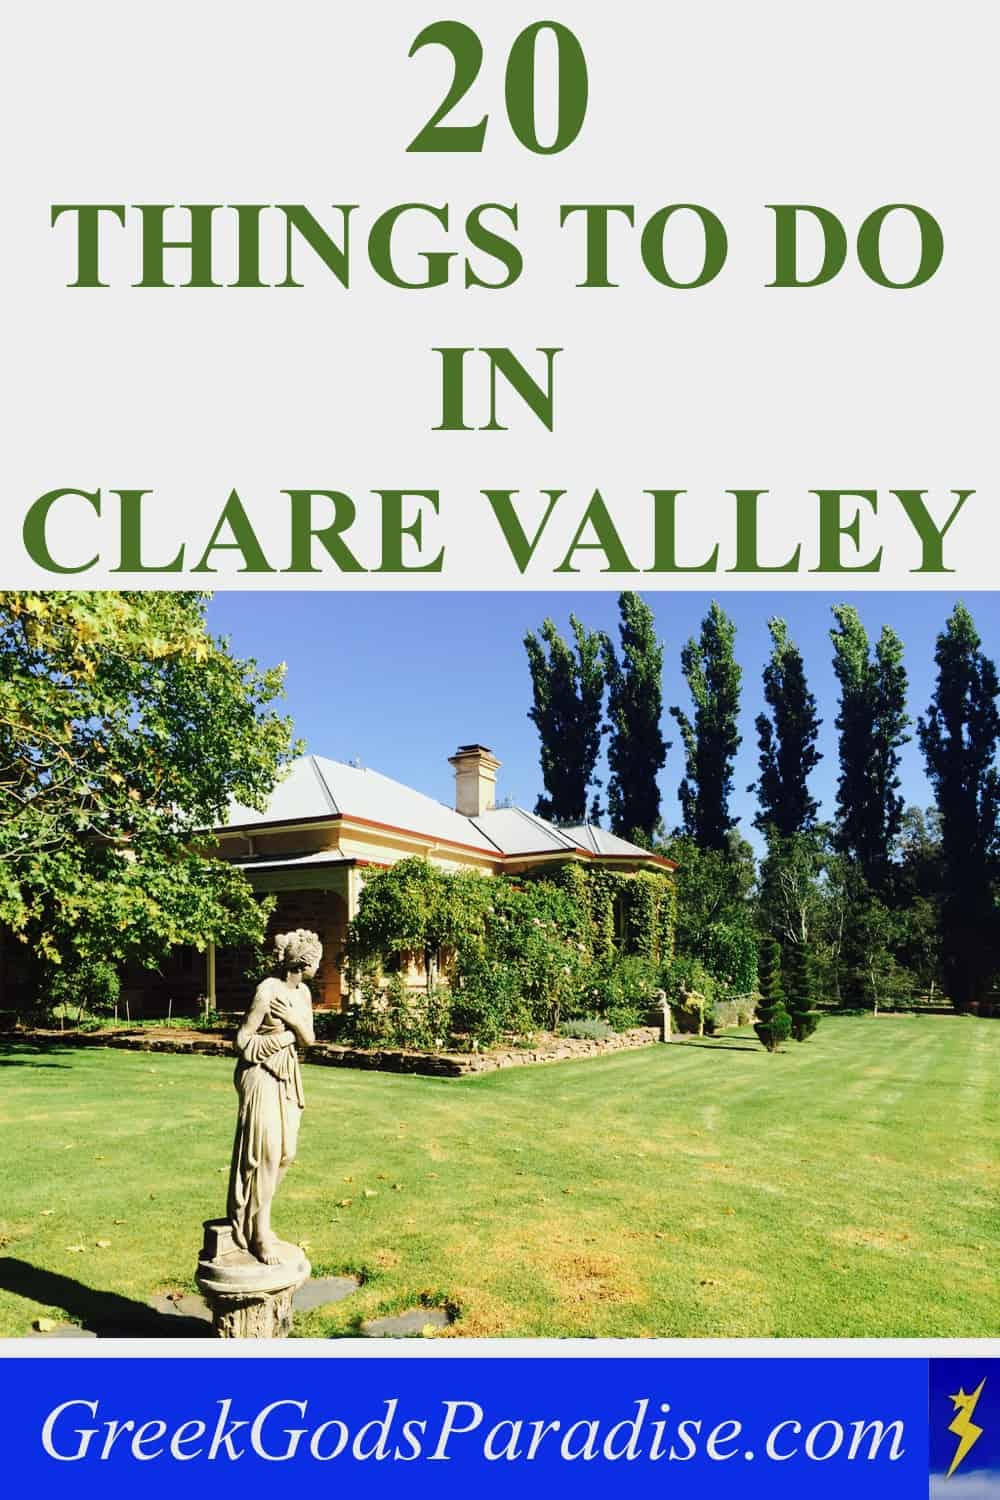 20 Things to do in Clare Valley